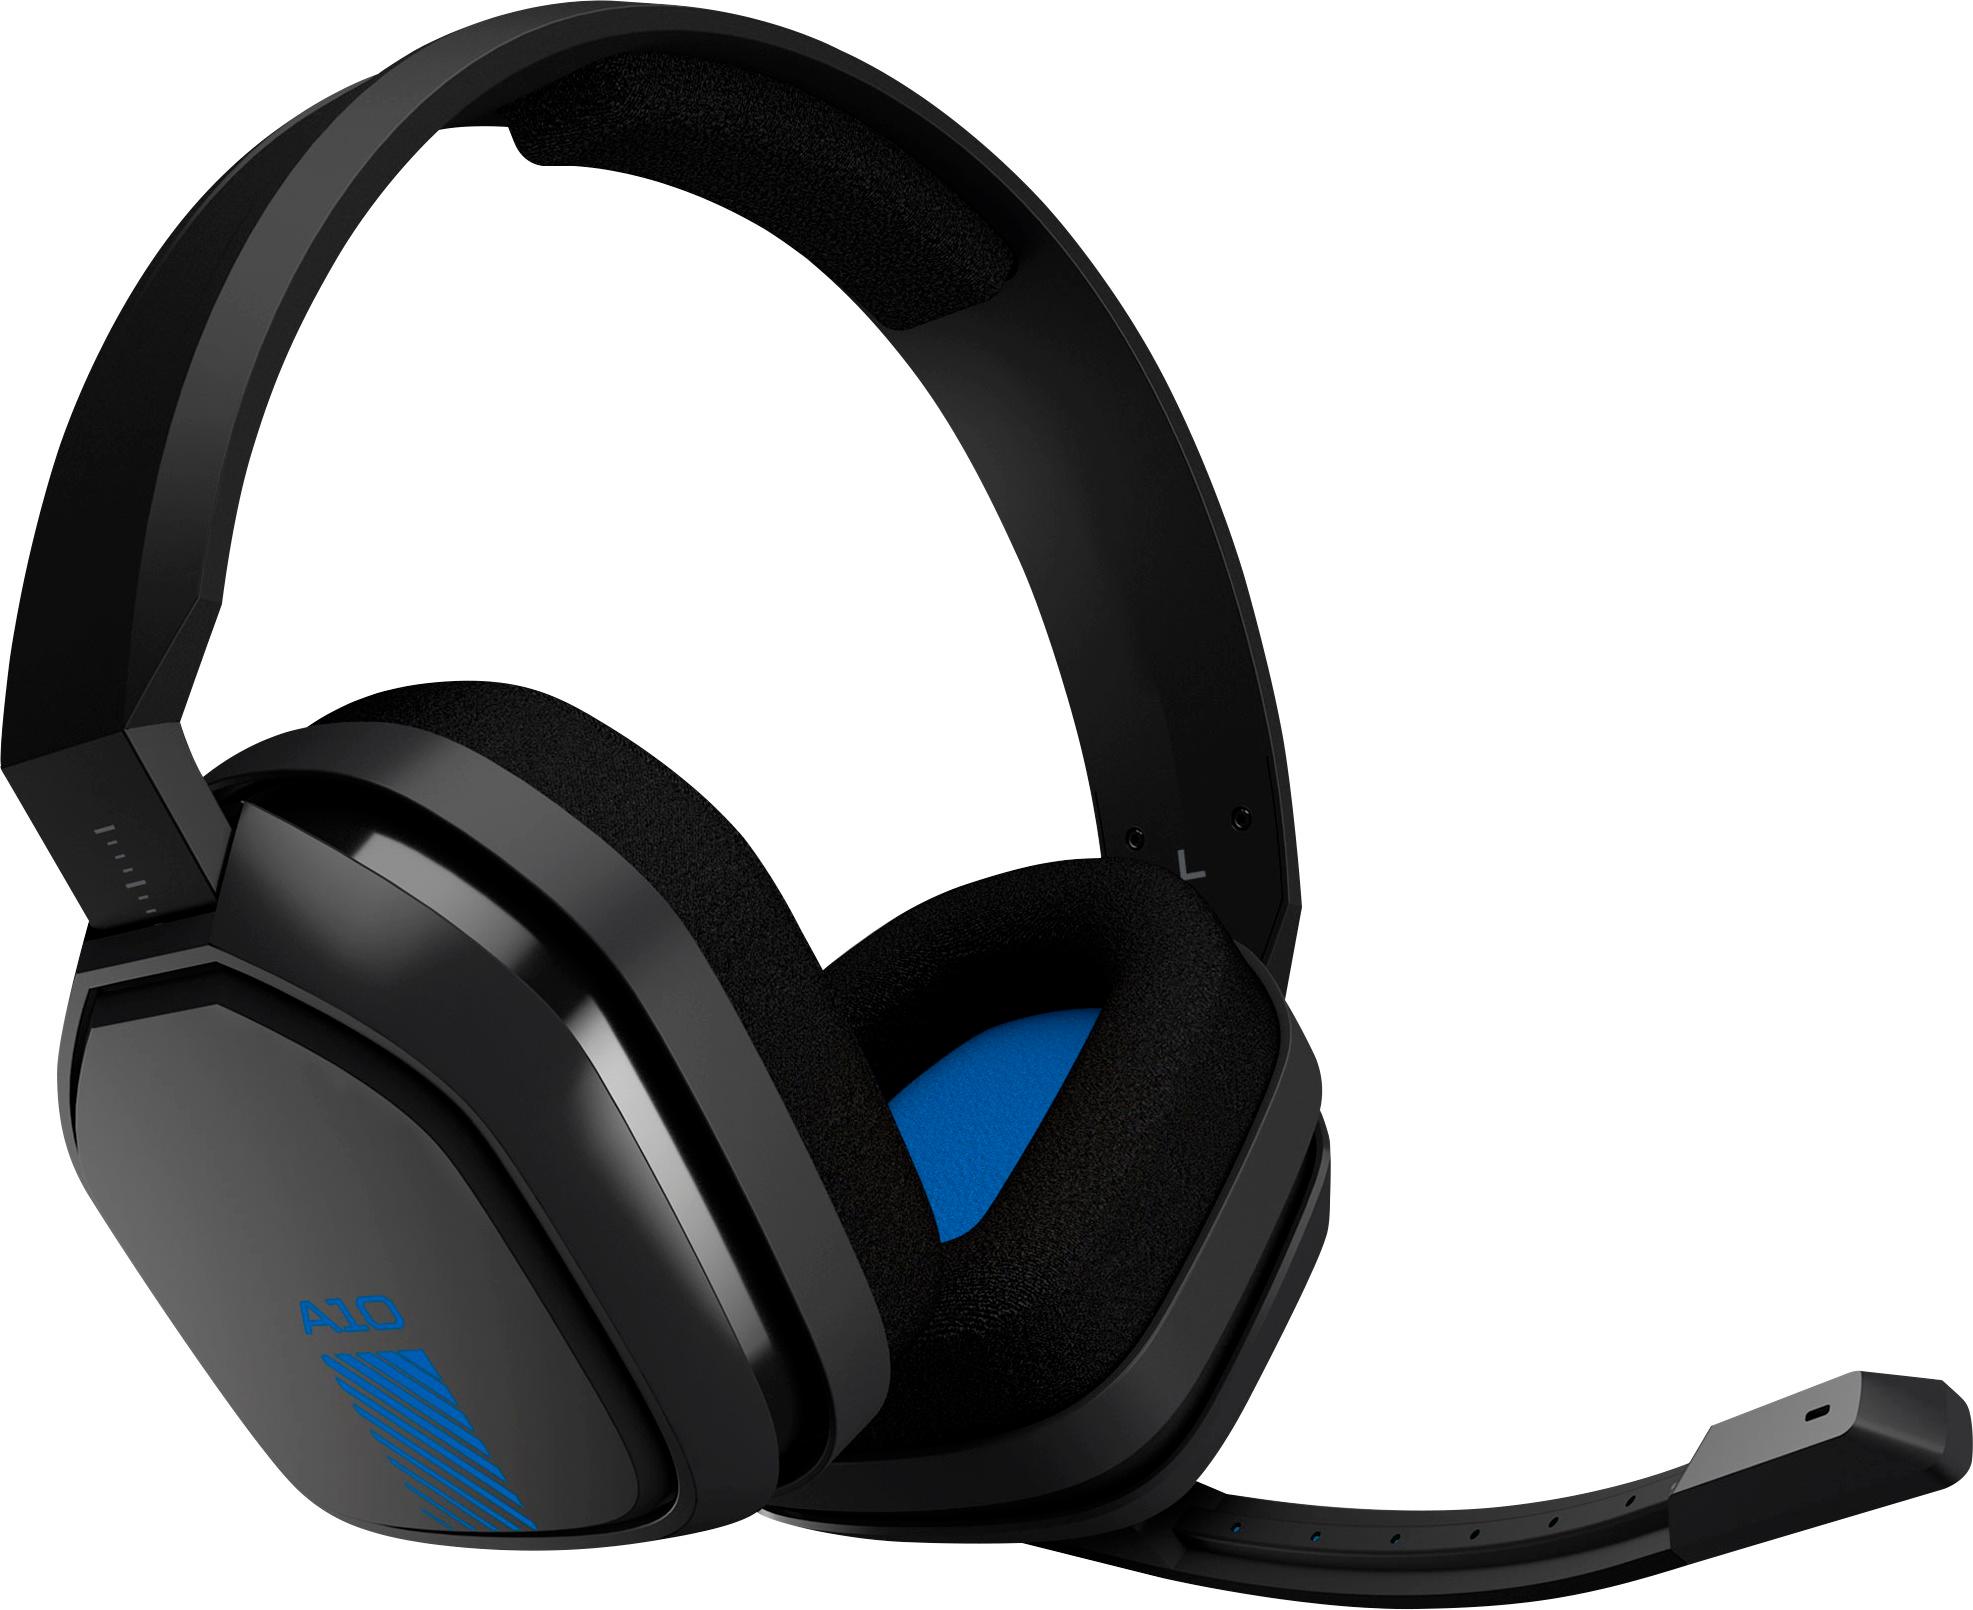 Afstoting salaris ik heb het gevonden Astro Gaming A10 Wired Stereo Over-the-Ear Gaming Headset for PS4 & PS5  with Flip-to-Mute Mic Black/Blue 939-001509 - Best Buy